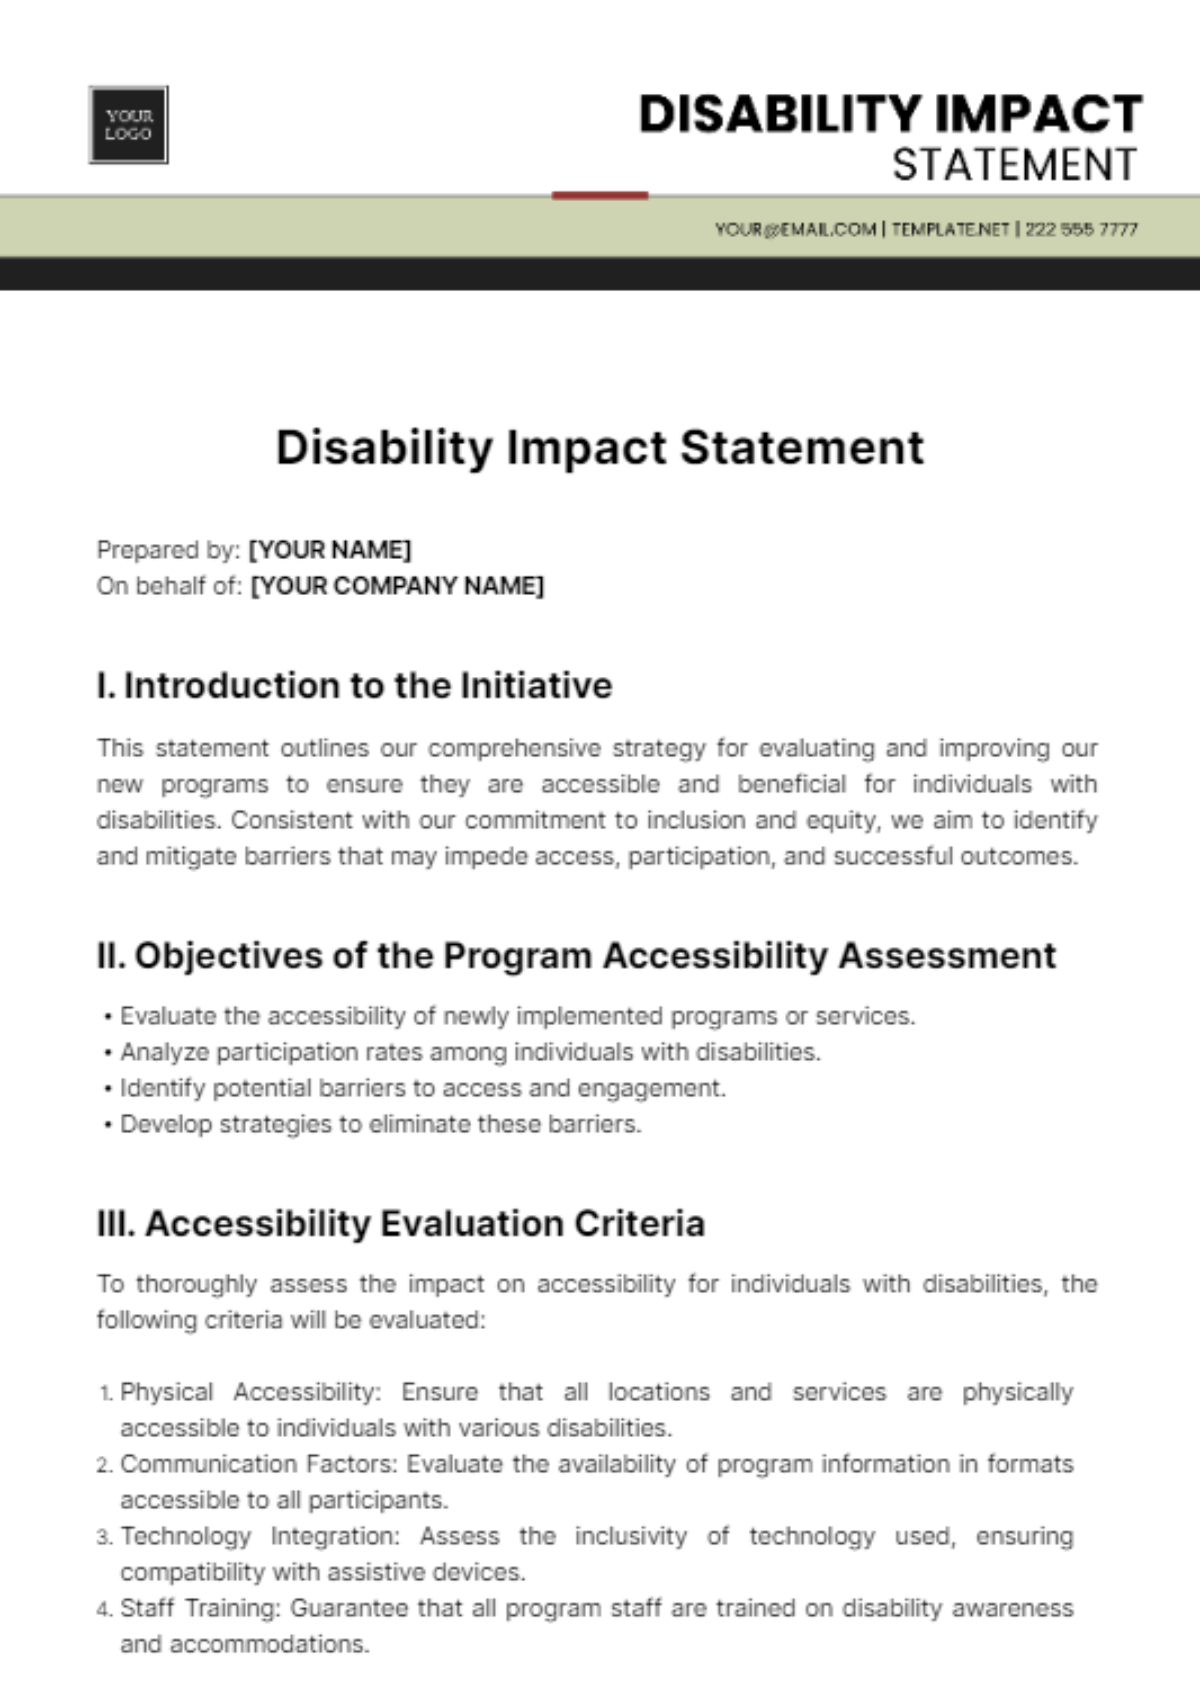 Disability Impact Statement Template